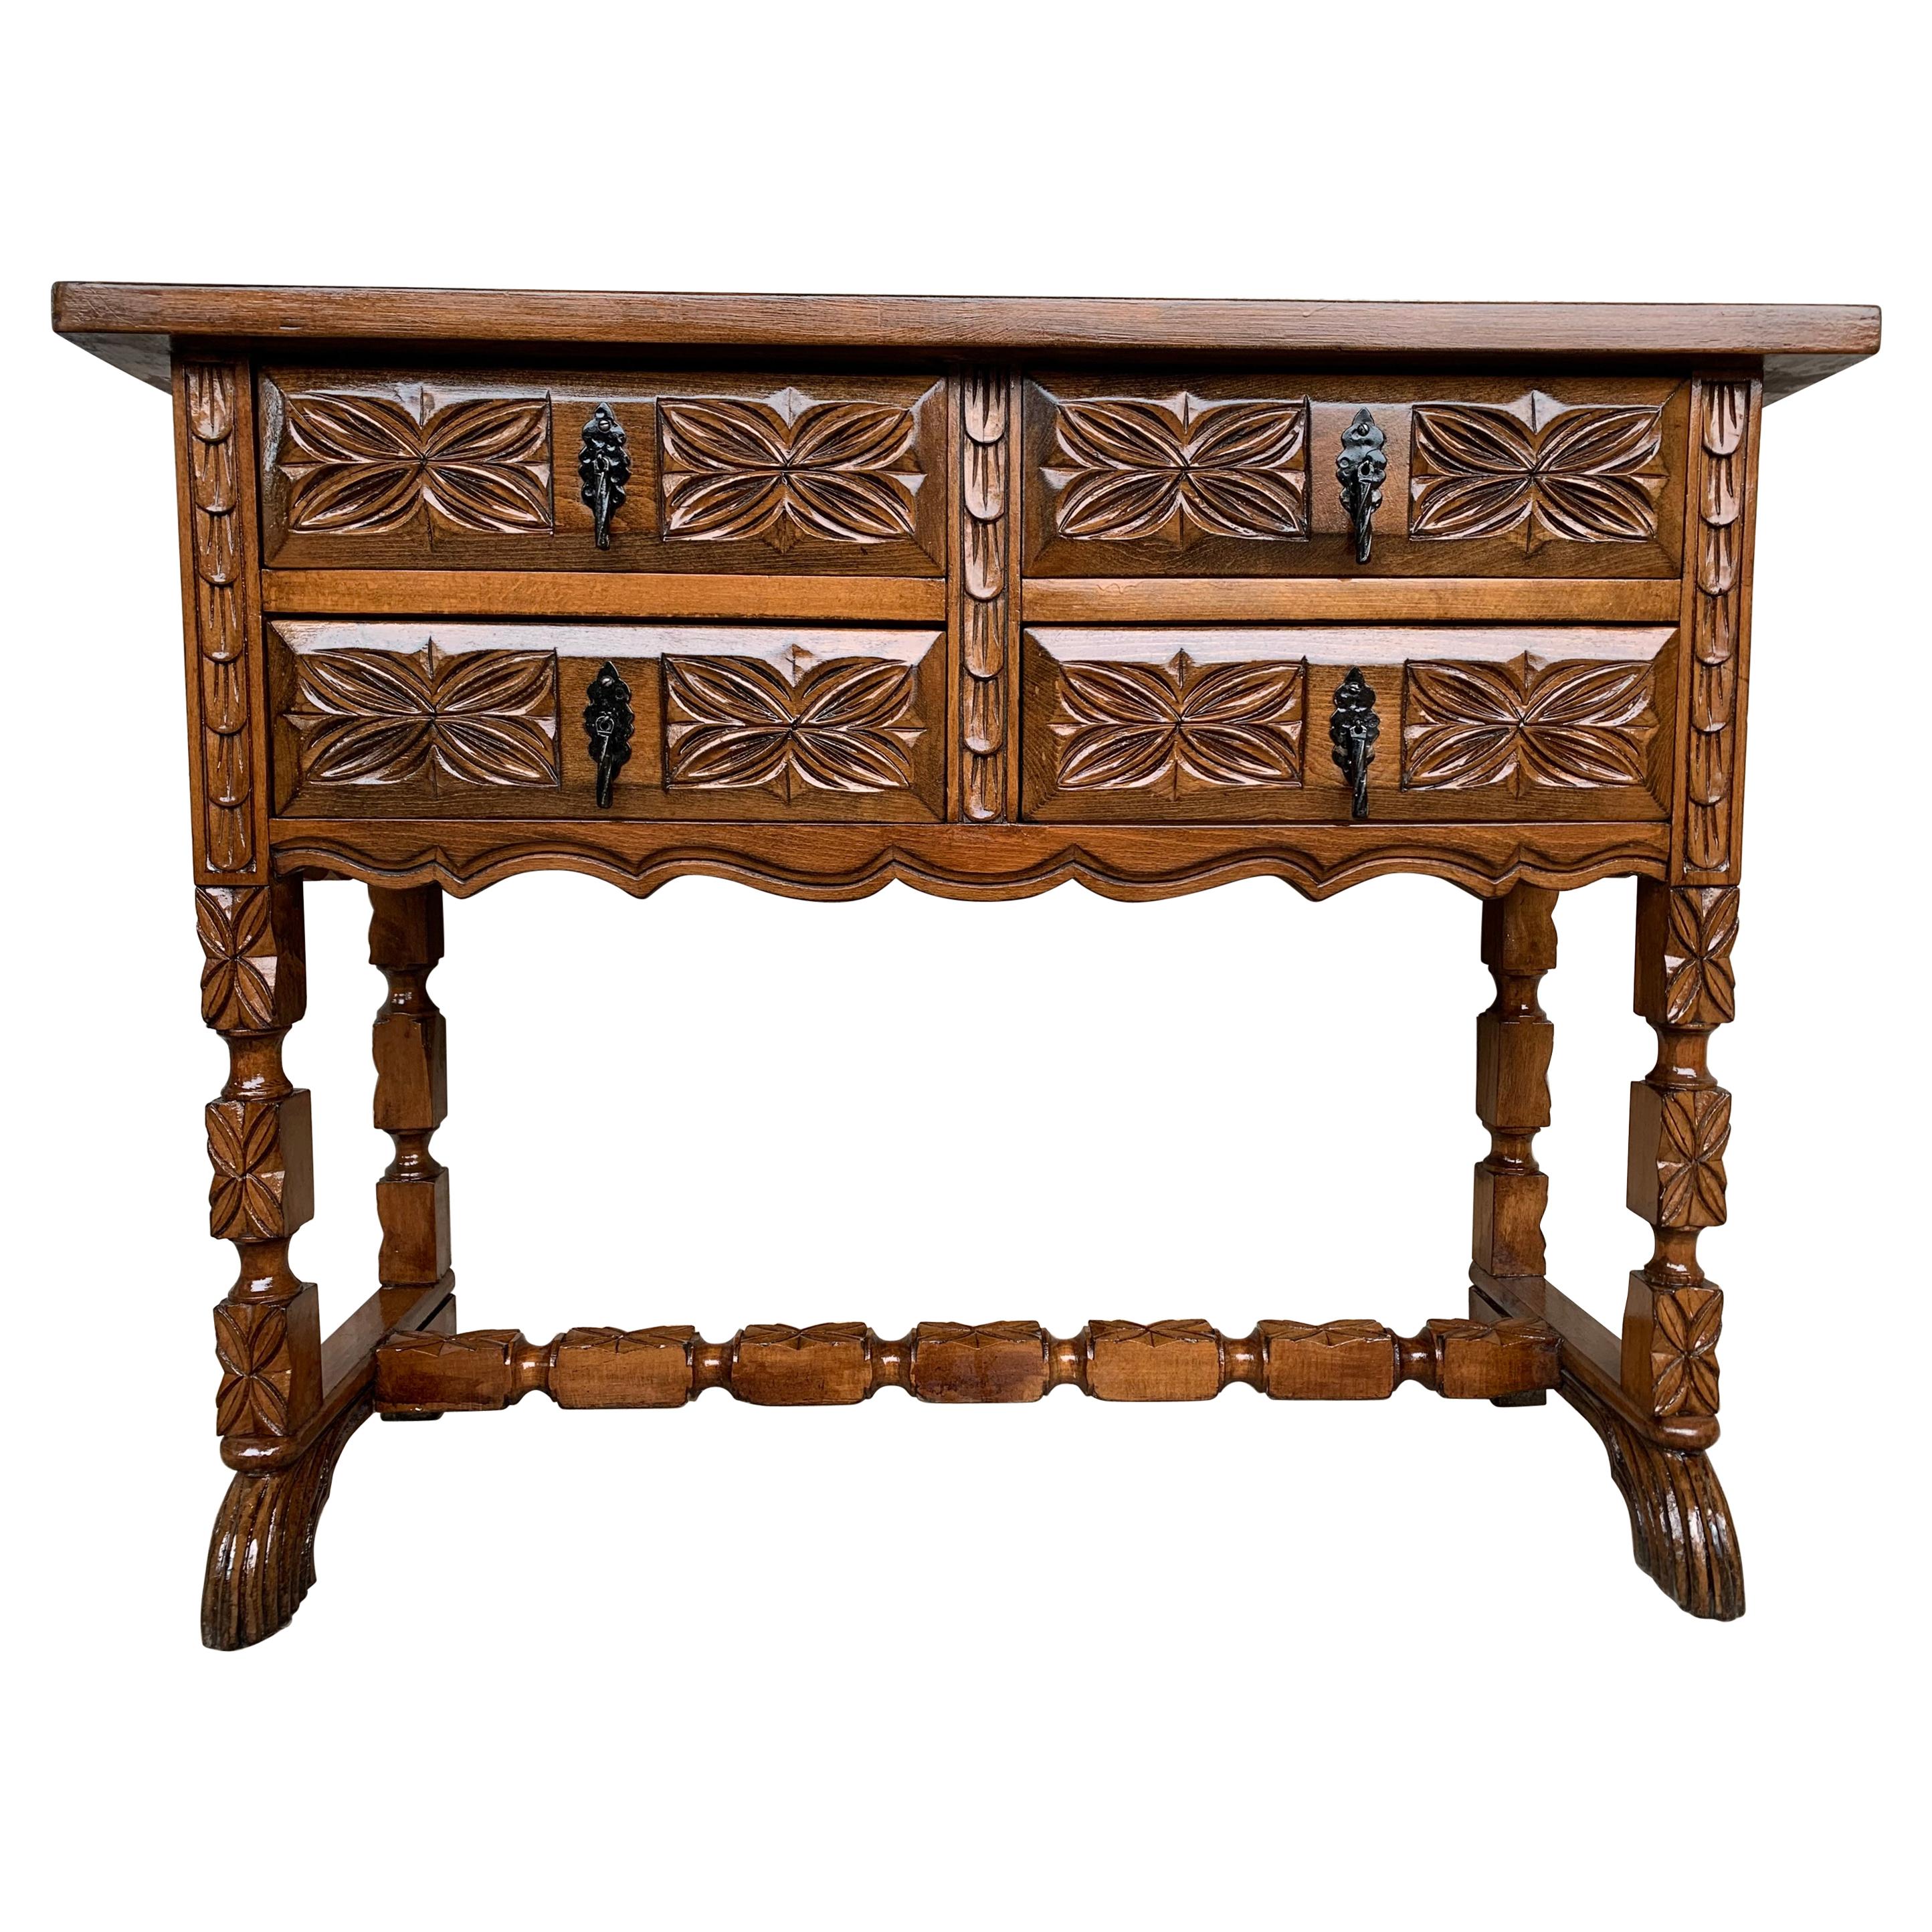 19th Century Catalan Spanish Carved Walnut Console Sofa Table, Four Drawers